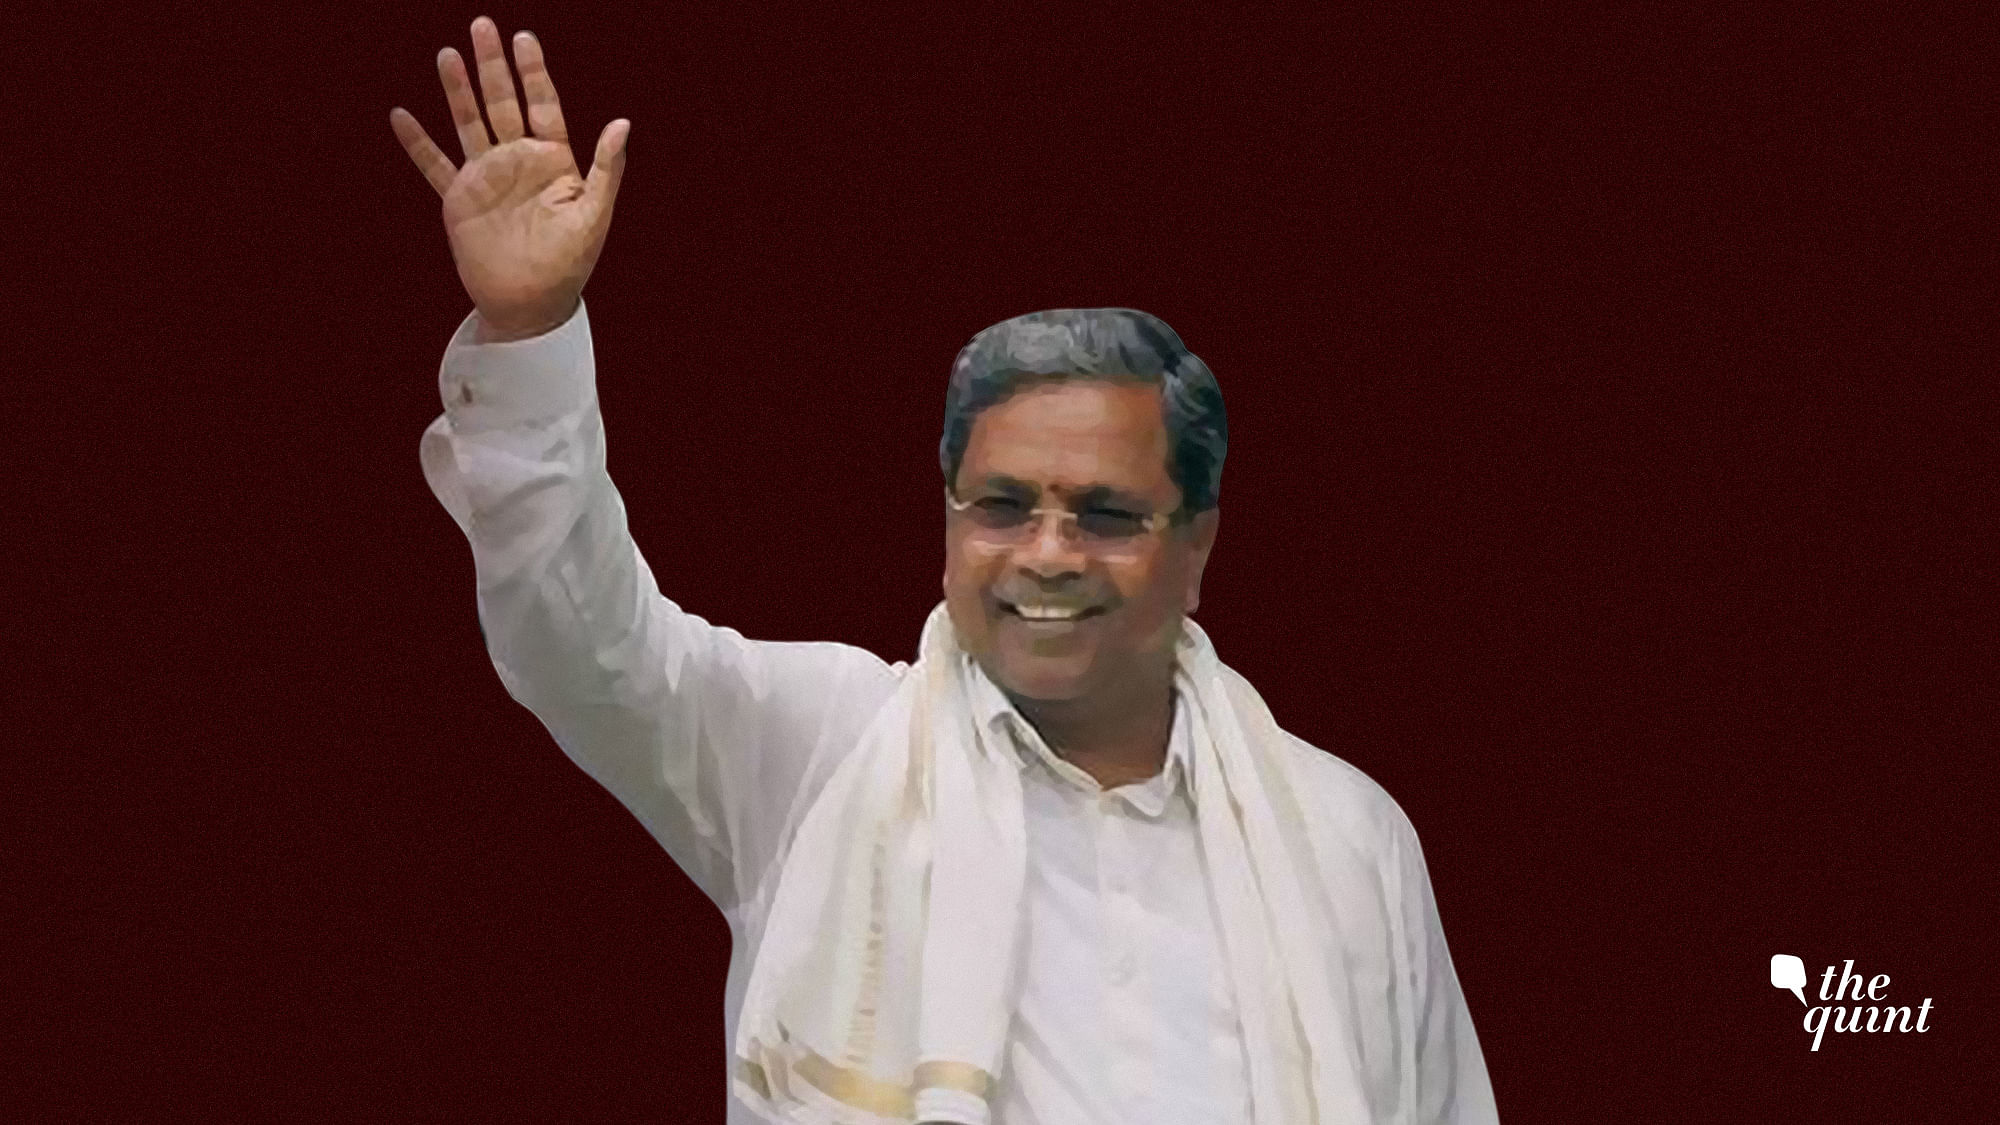 Although associated with Siddaramaiah, the history of the AHINDA strategy goes back decades.&nbsp;